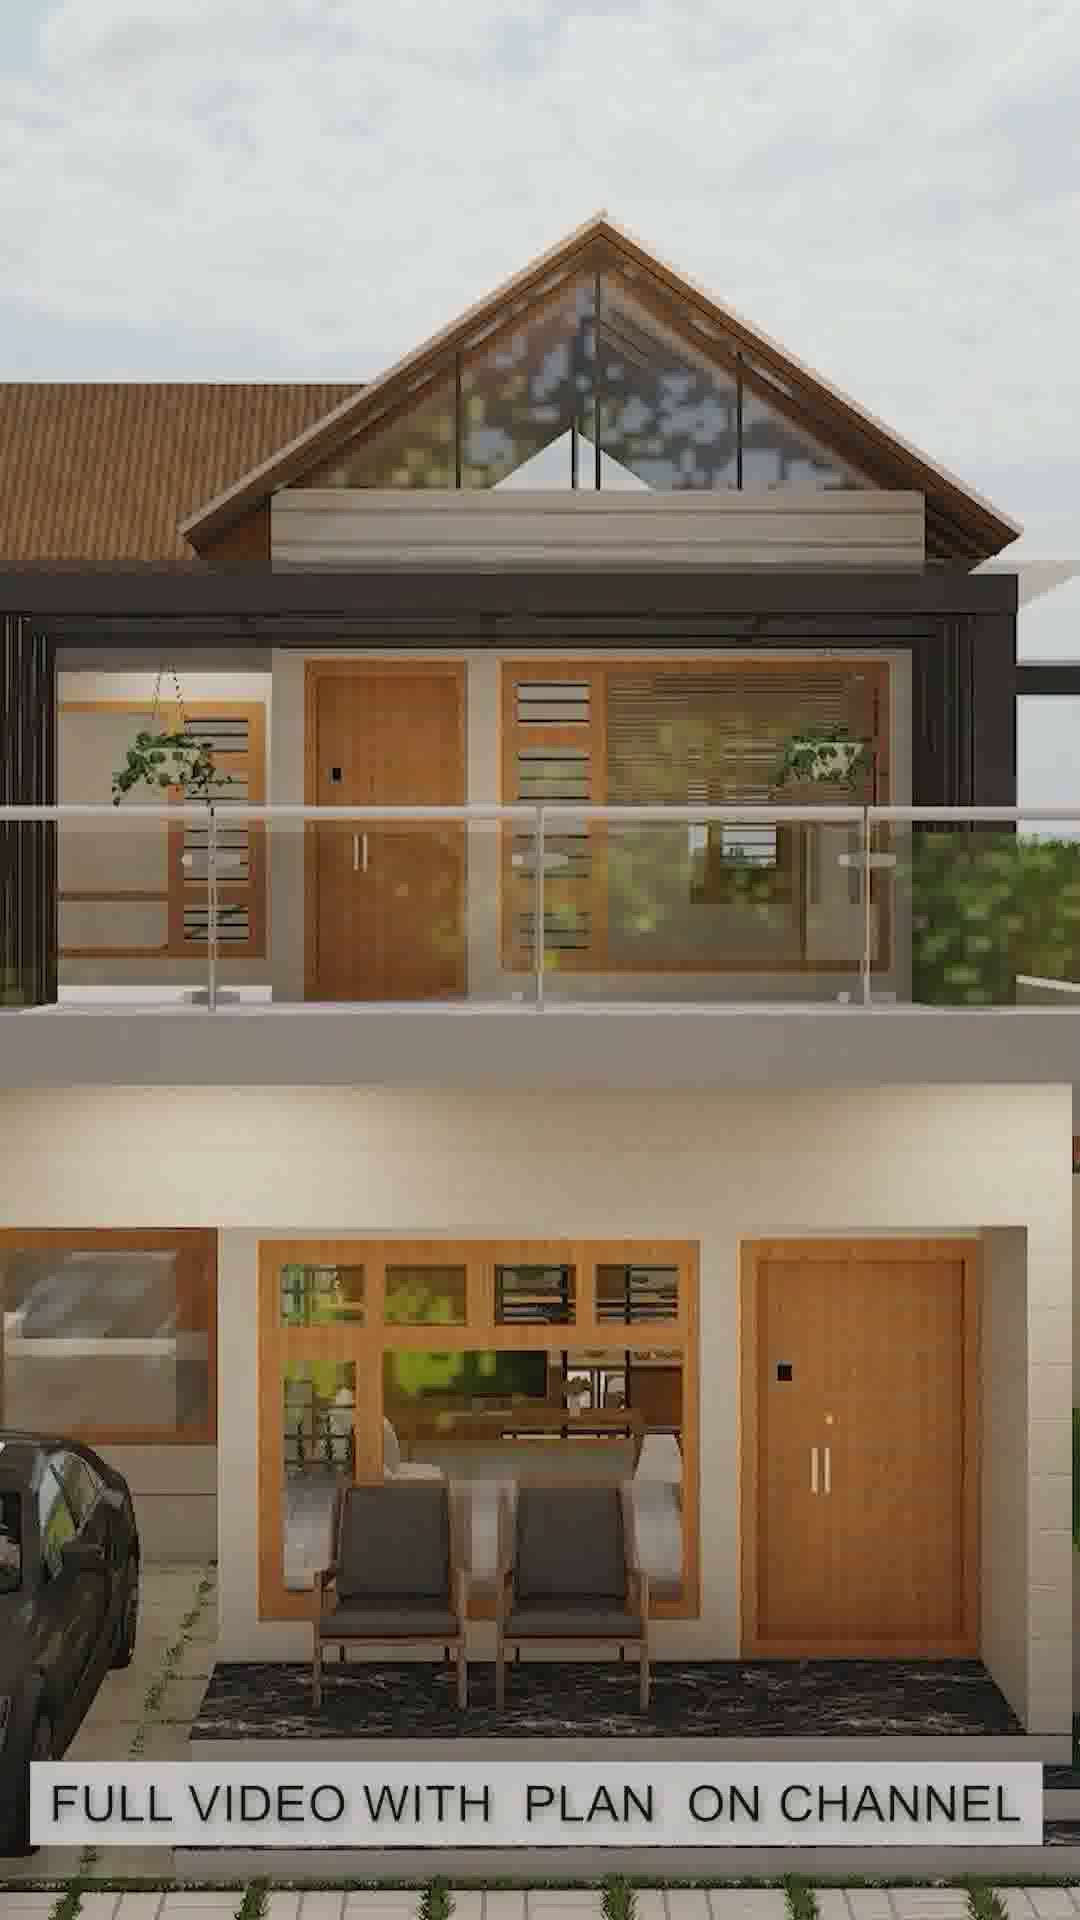 contemporary home #HouseDesigns  #ElevationHome  #HomeDecor  #SmallHomePlans  #MixedRoofHouse  #ContemporaryHouse  #homeandinterior